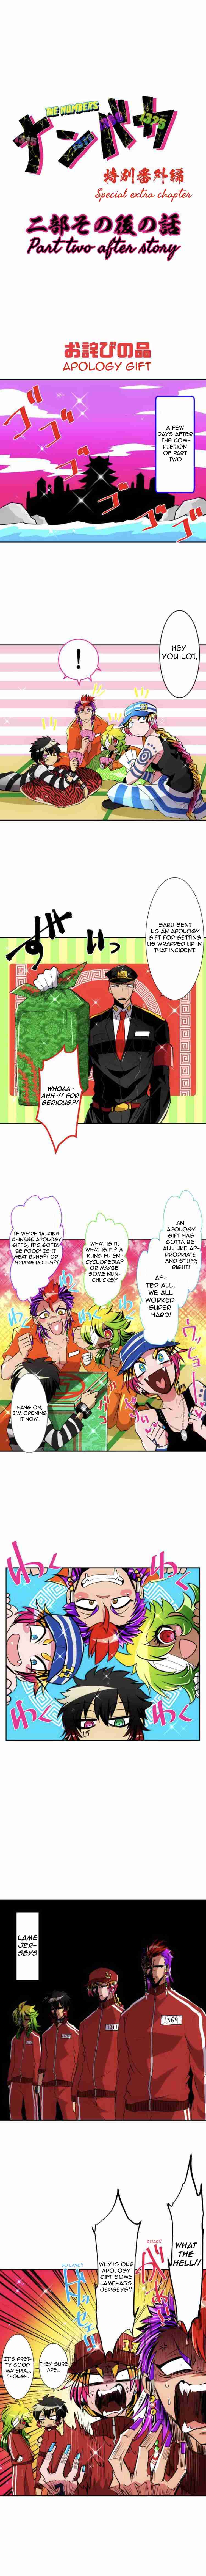 Nanbaka Ch. 146.1 Part Two After Story